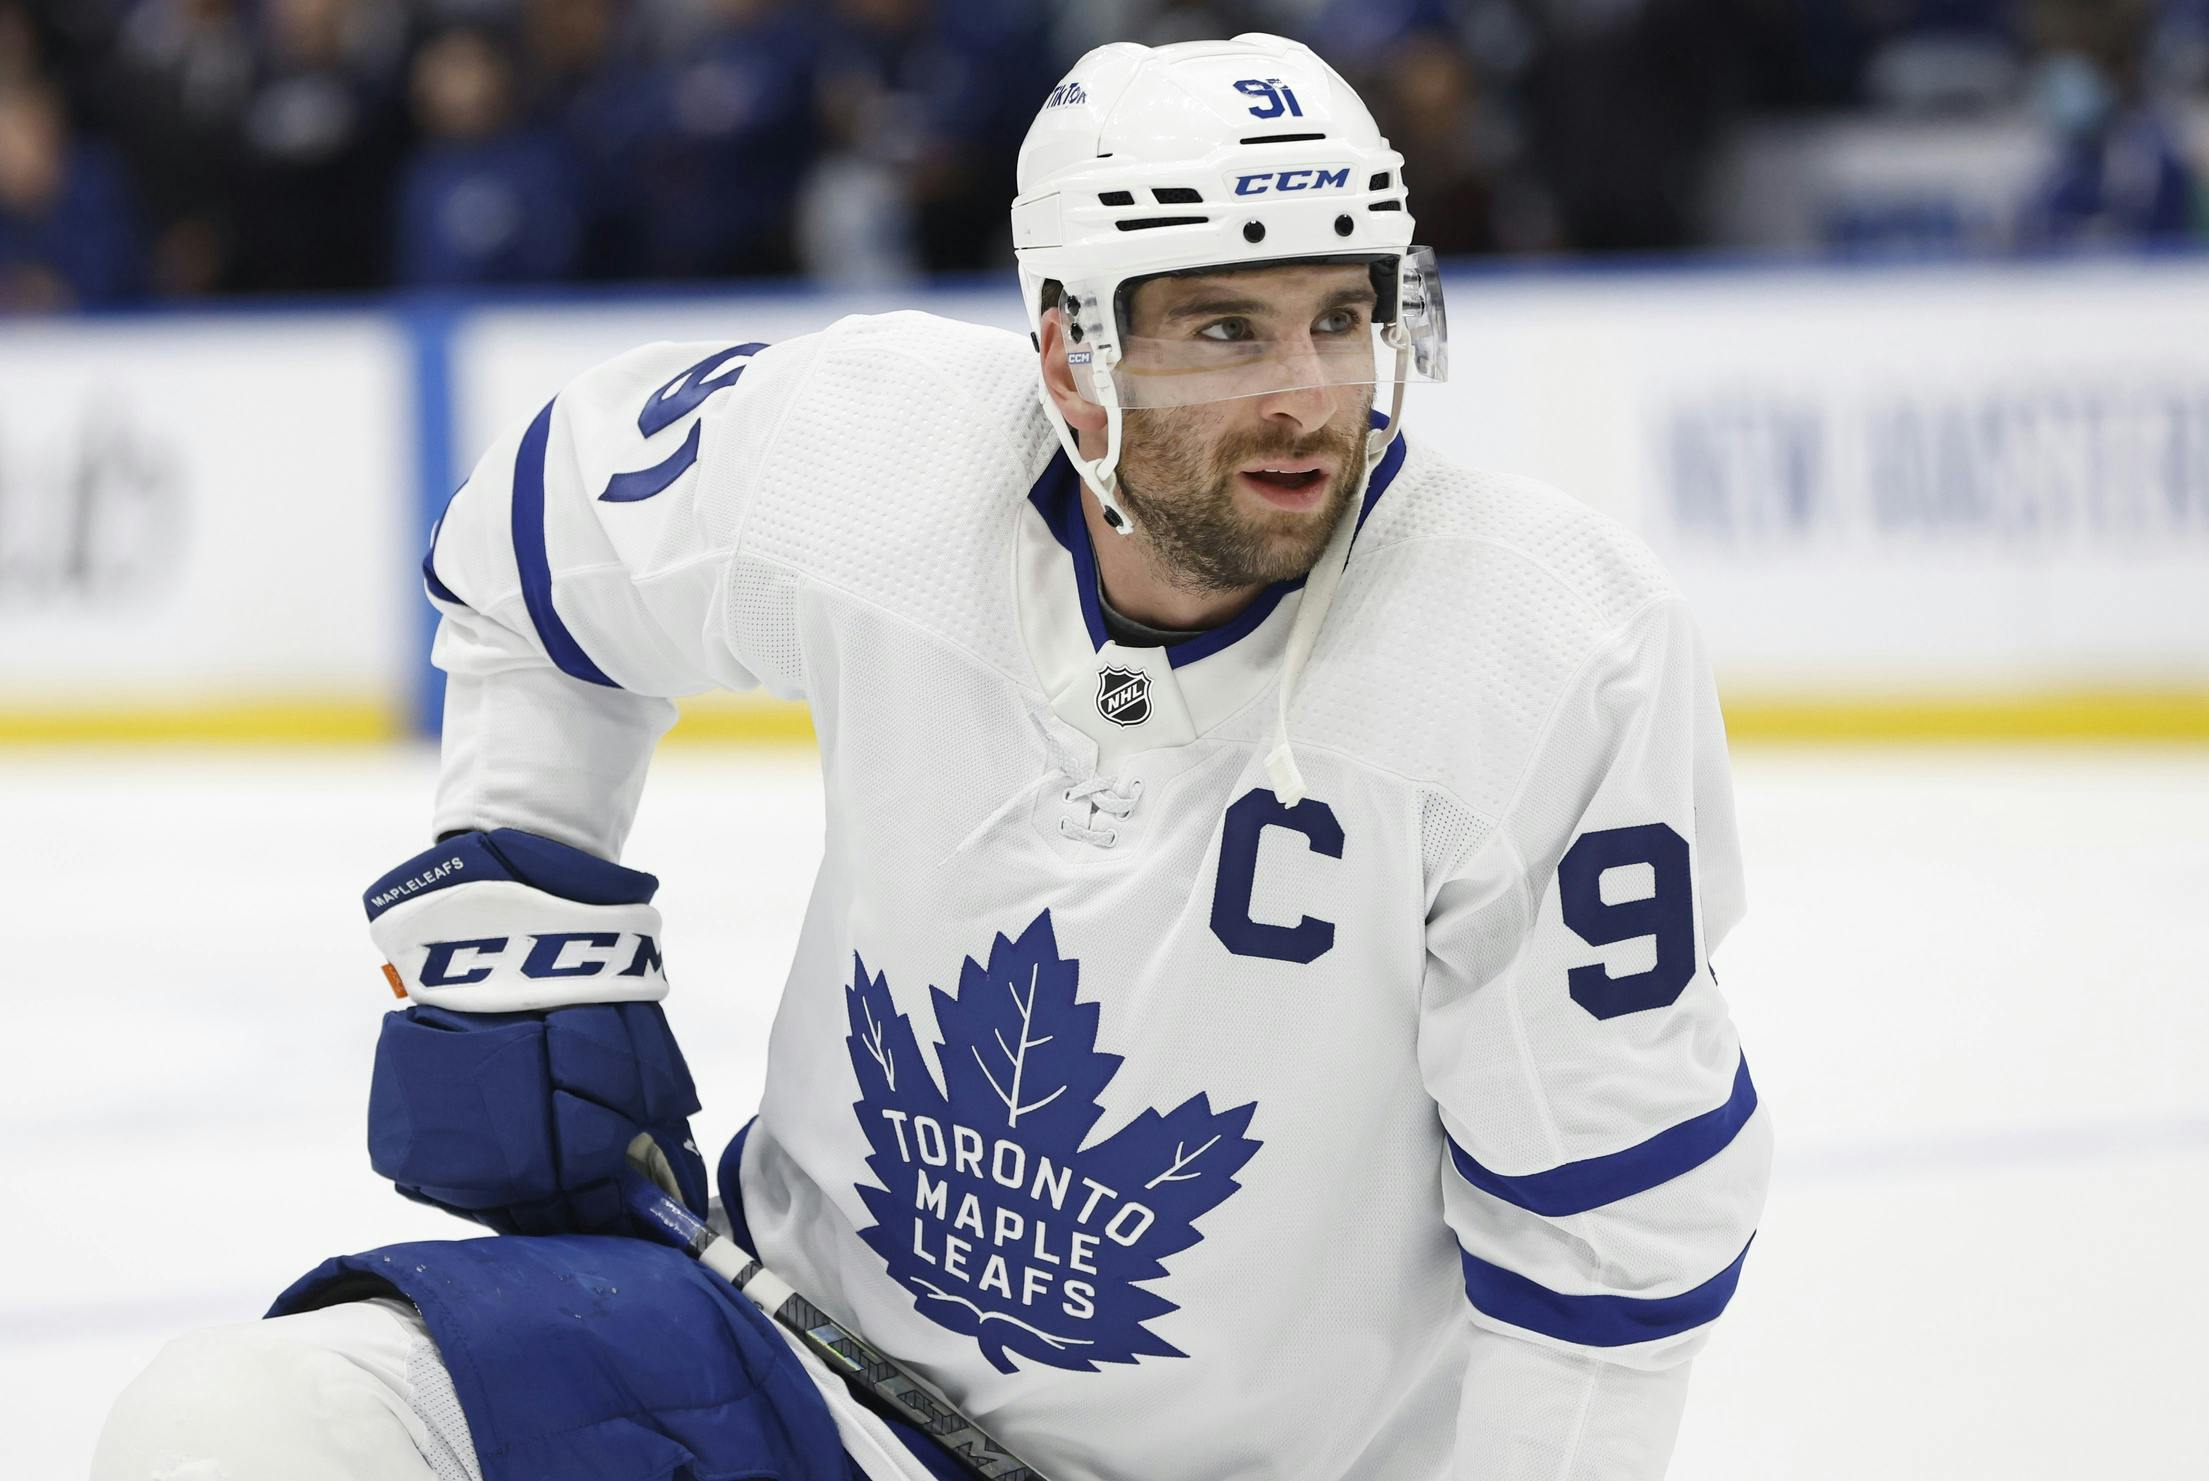 Maple Leafs' John Tavares skates 1 week after scary injury – The Denver Post